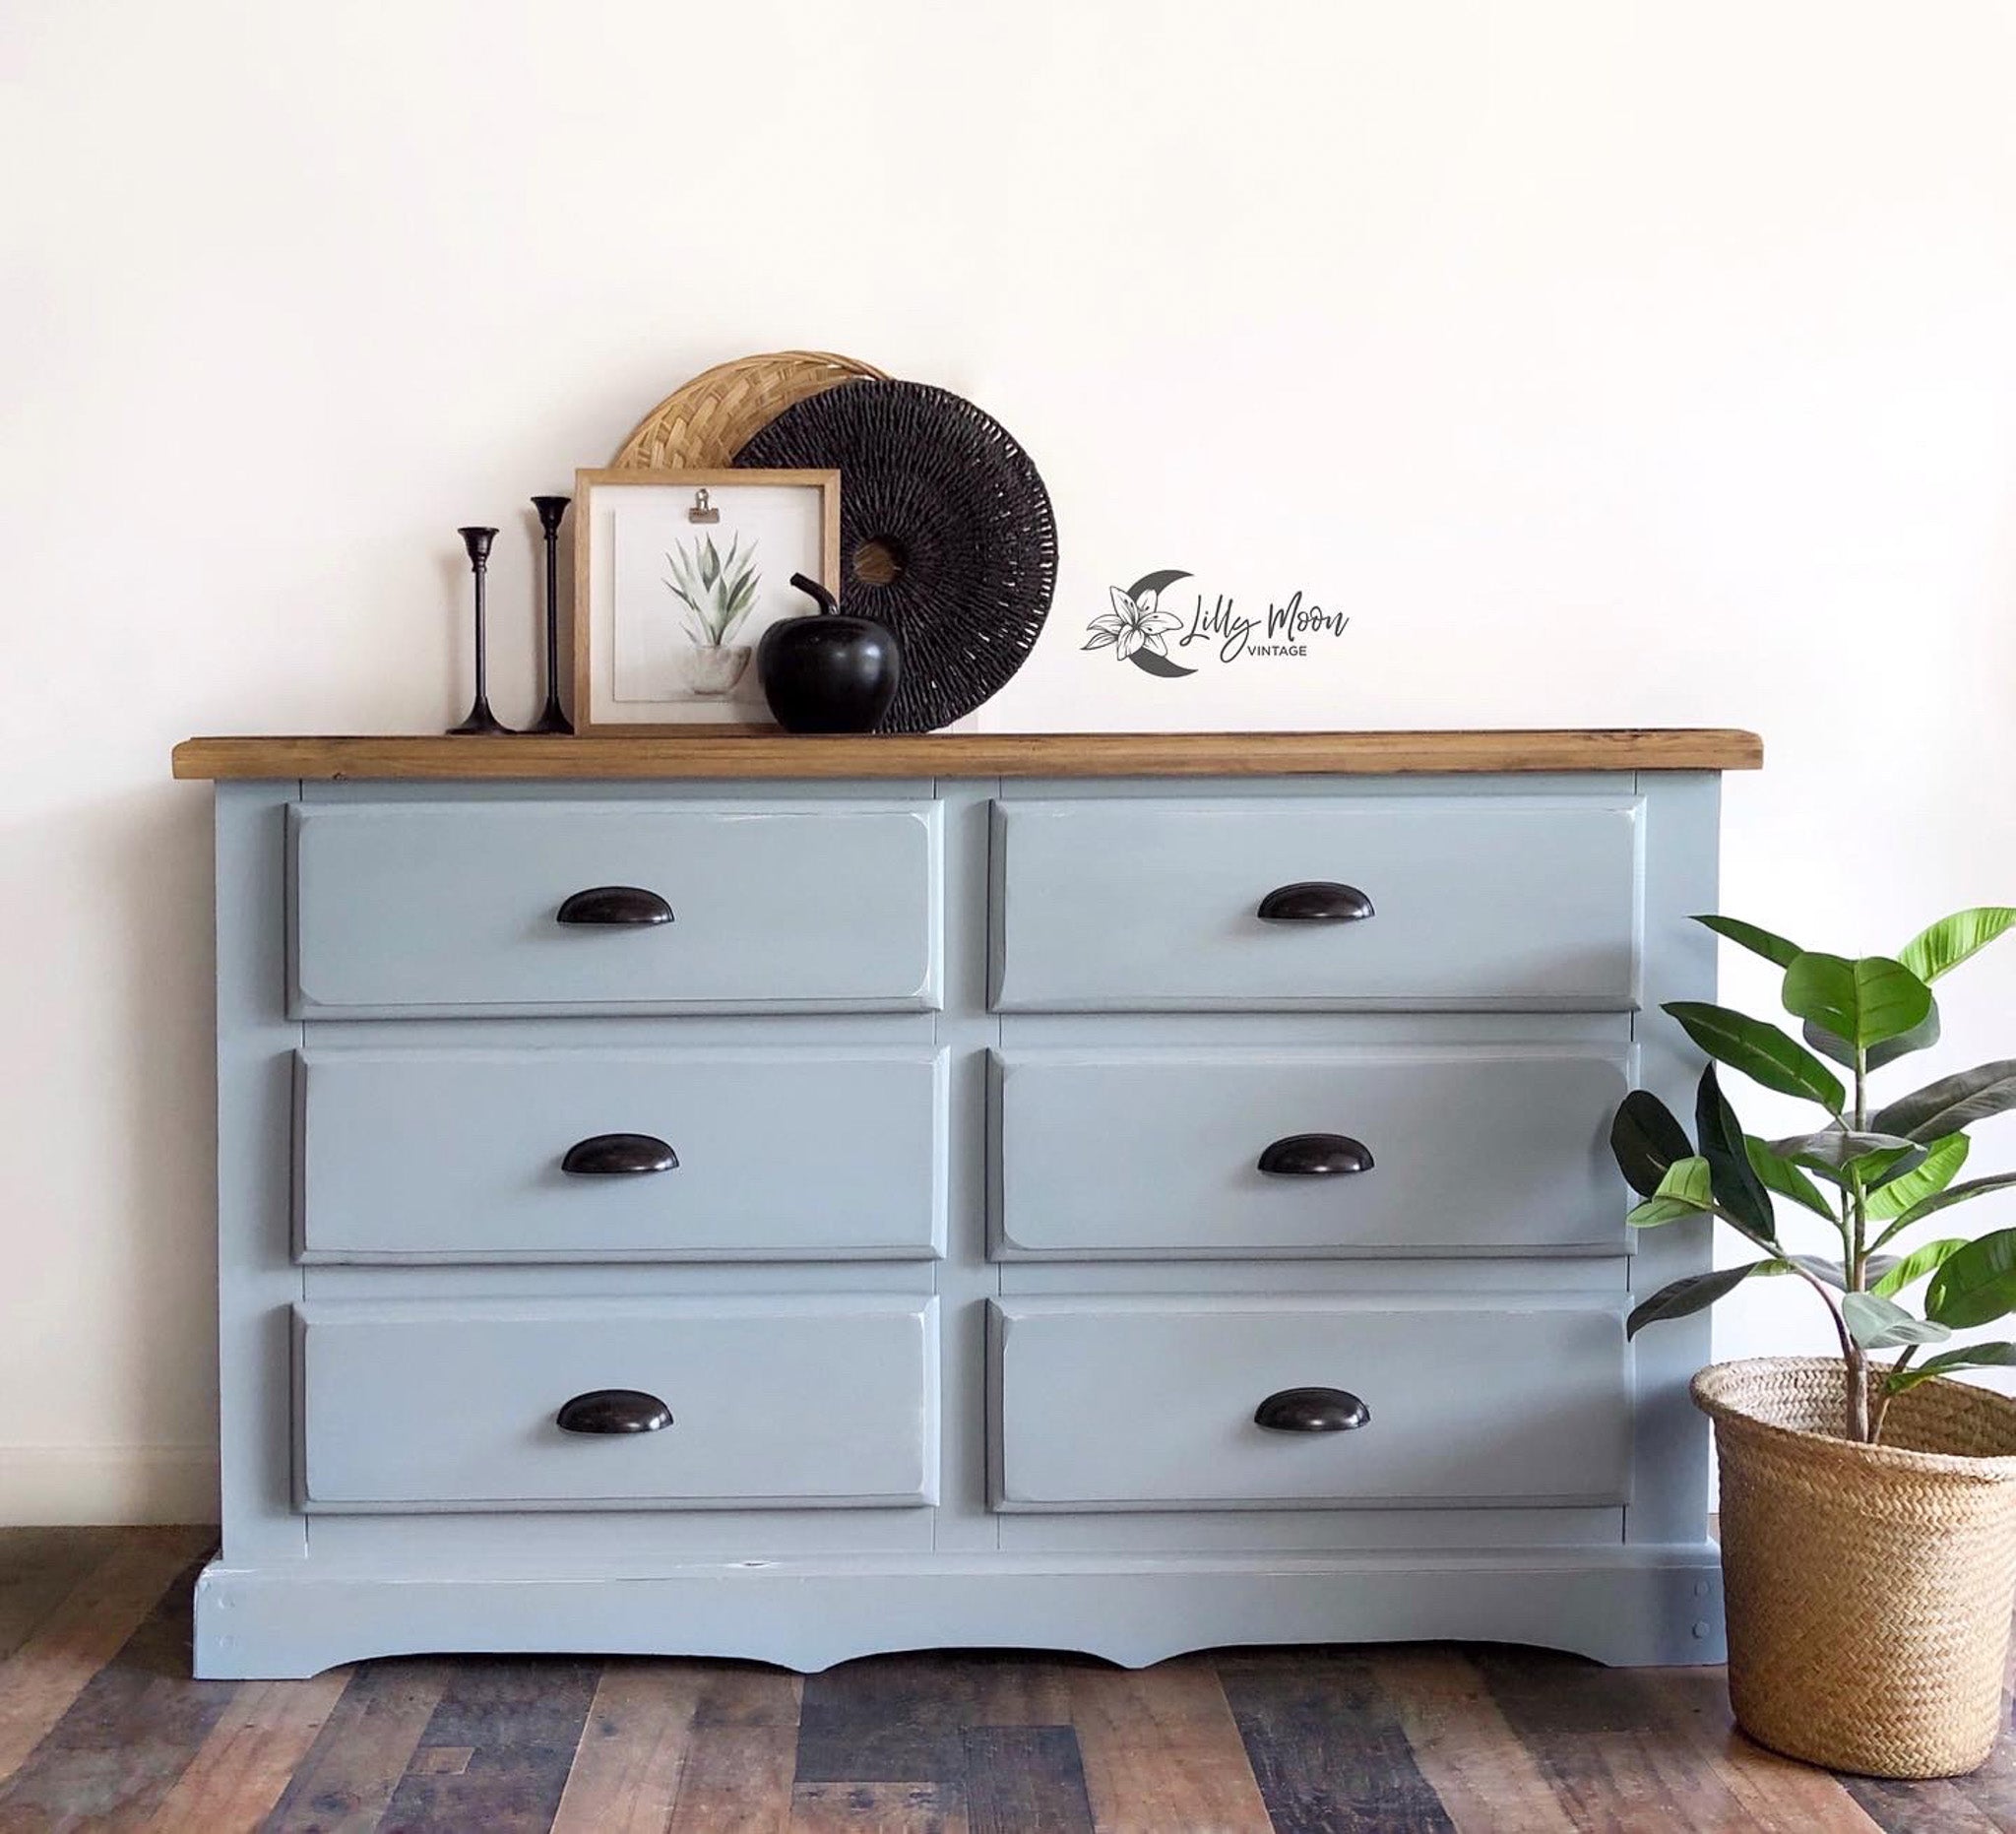 A 6-drawer dresser refurbished by Lilly Moon Designs is painted in Dixie Belle's Savannah Mist chalk mineral paint and has a natural wood top.